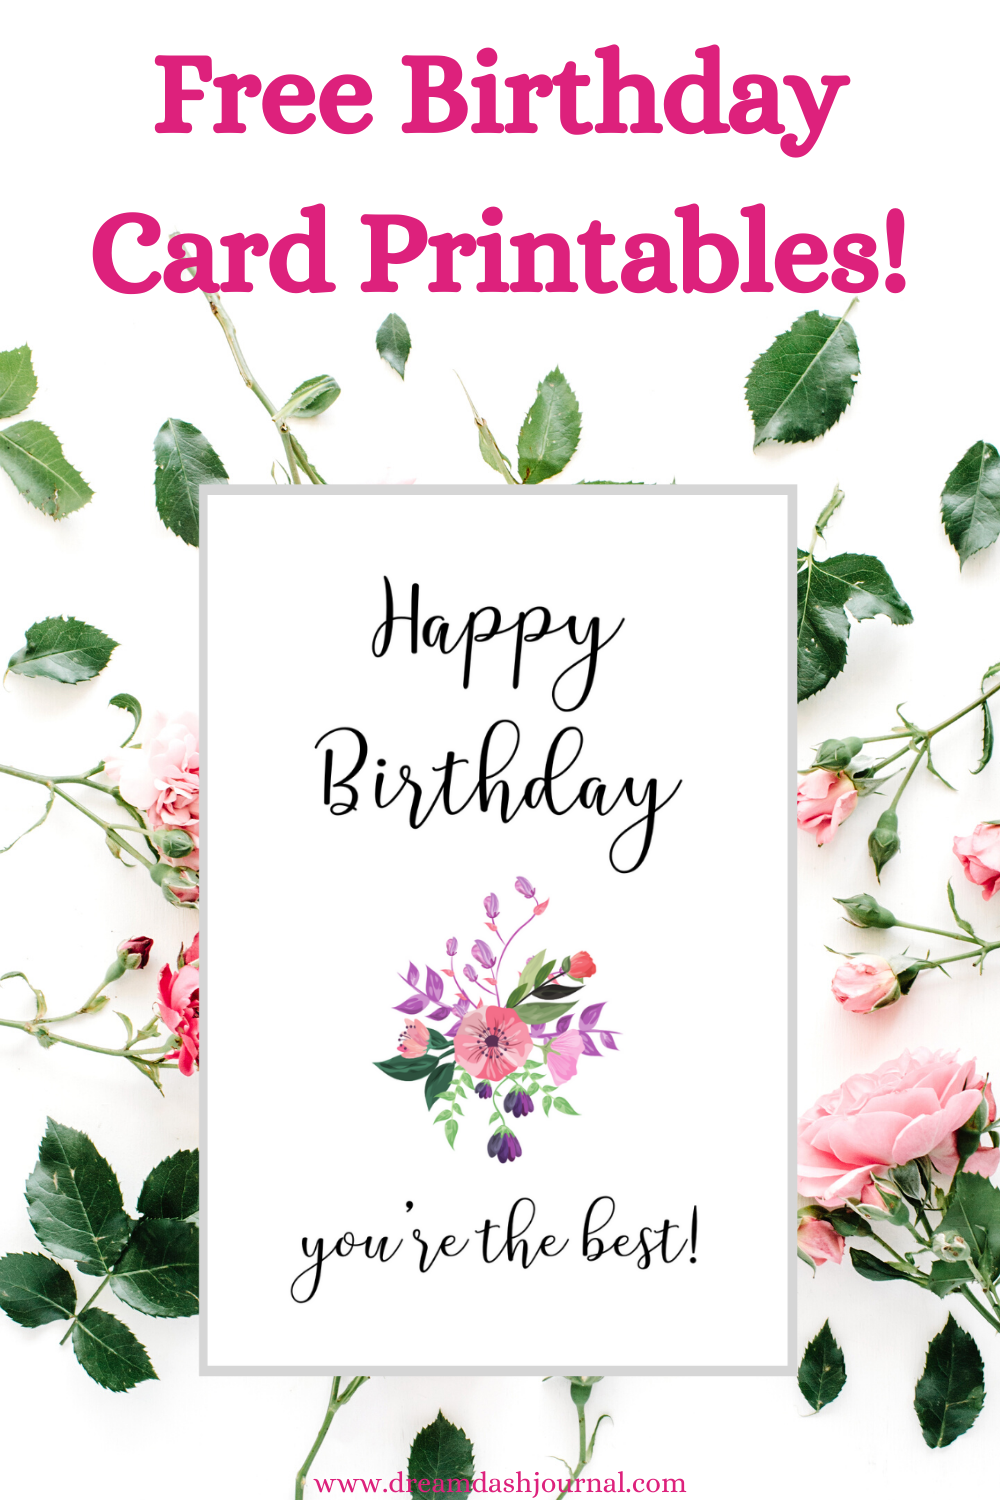 6 Cute Printable Birthday Cards For Her Pretty Free Happy Birthday Cards Printable Free Printable Birthday Cards Birthday Card Printable - Free Printable Birthday Cards For Her